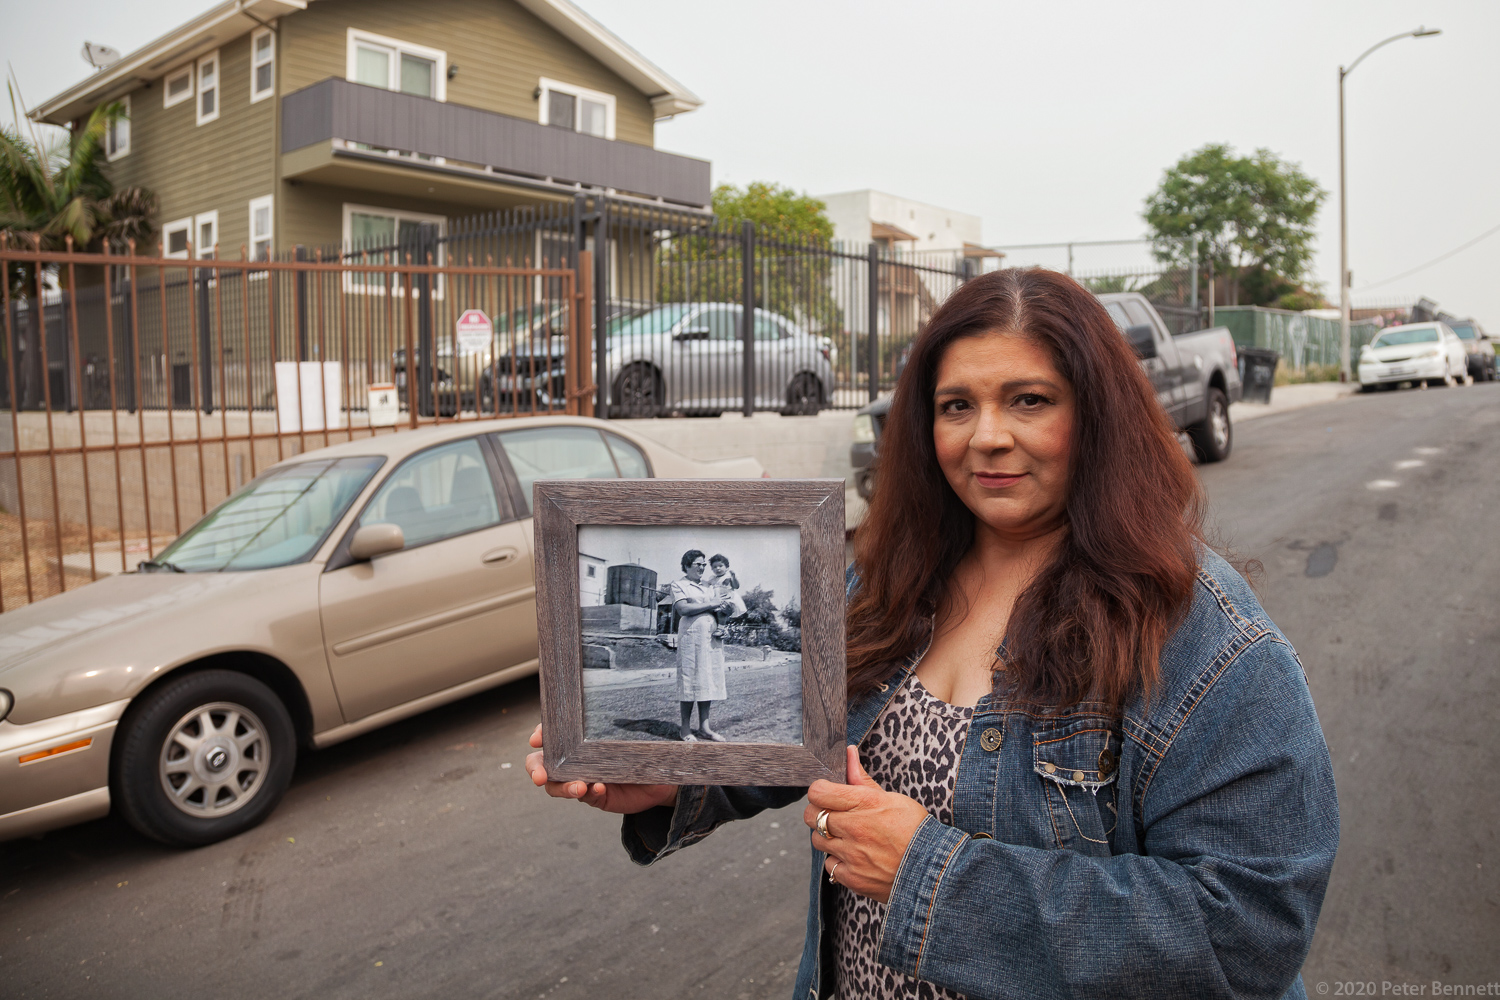 Lifelong resident and neighborhood activist Rosalinda Morales stands on Firmin Street in the same location as a photo from 1958 of her aunt holding her in front of an oil tank. Dozens of abandoned wells still lie under homes and below ground along Firmin Street.